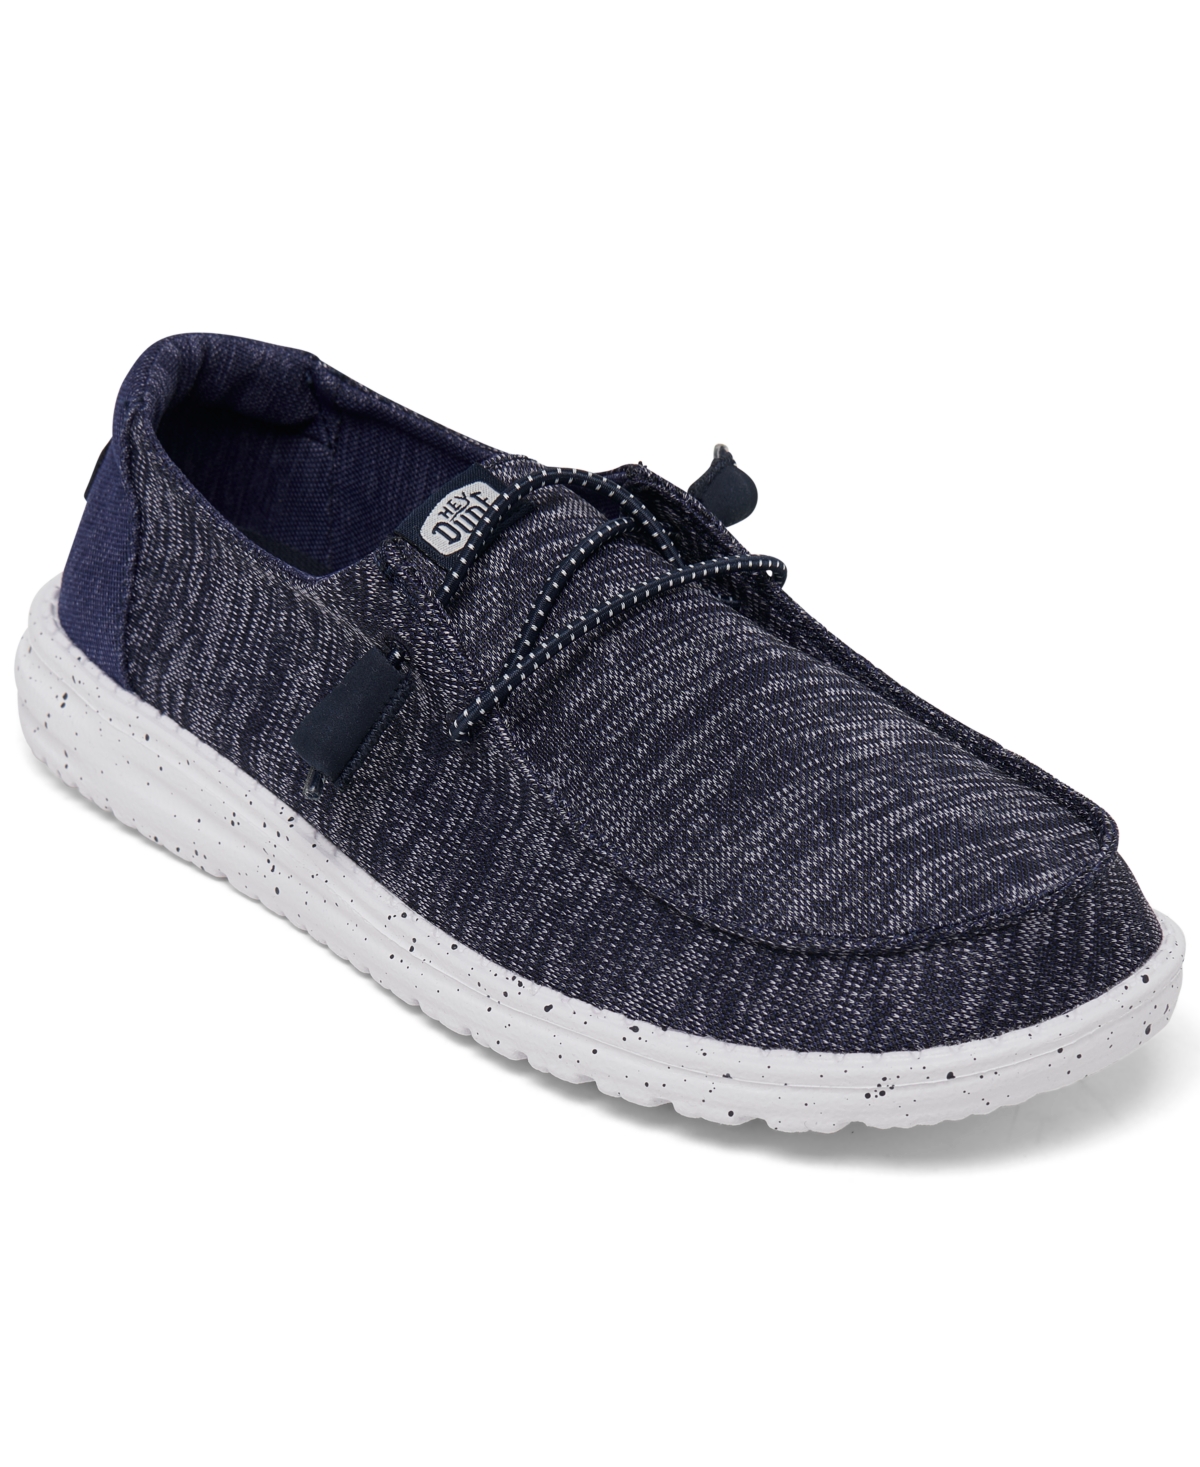 Women's Wendy Sport Knit Casual Moccasin Sneakers from Finish Line - Blue